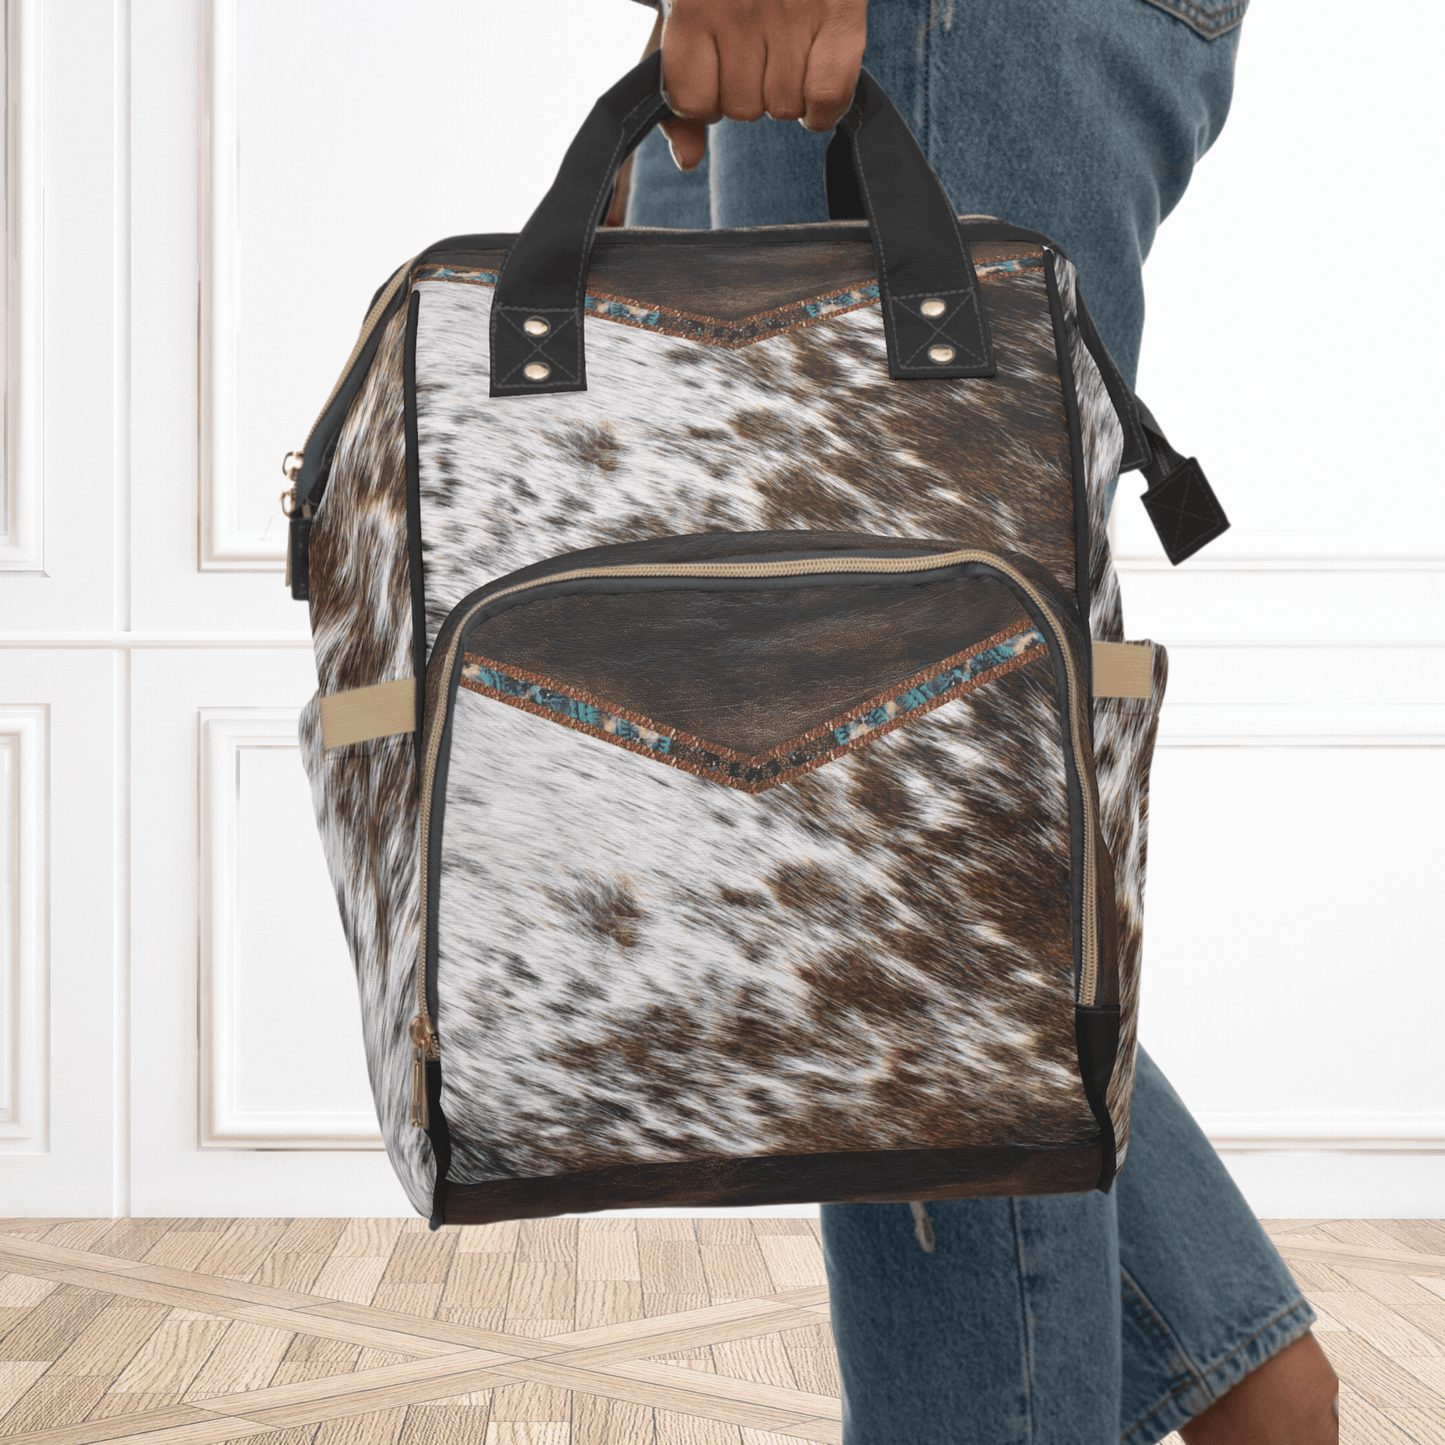 Our cowhide print multipurpose backpack can be held by the top black handles, as shown here. This cowhide print with leather print is a showstopper and can be monogrammed or enjoyed plain as in this picture. 